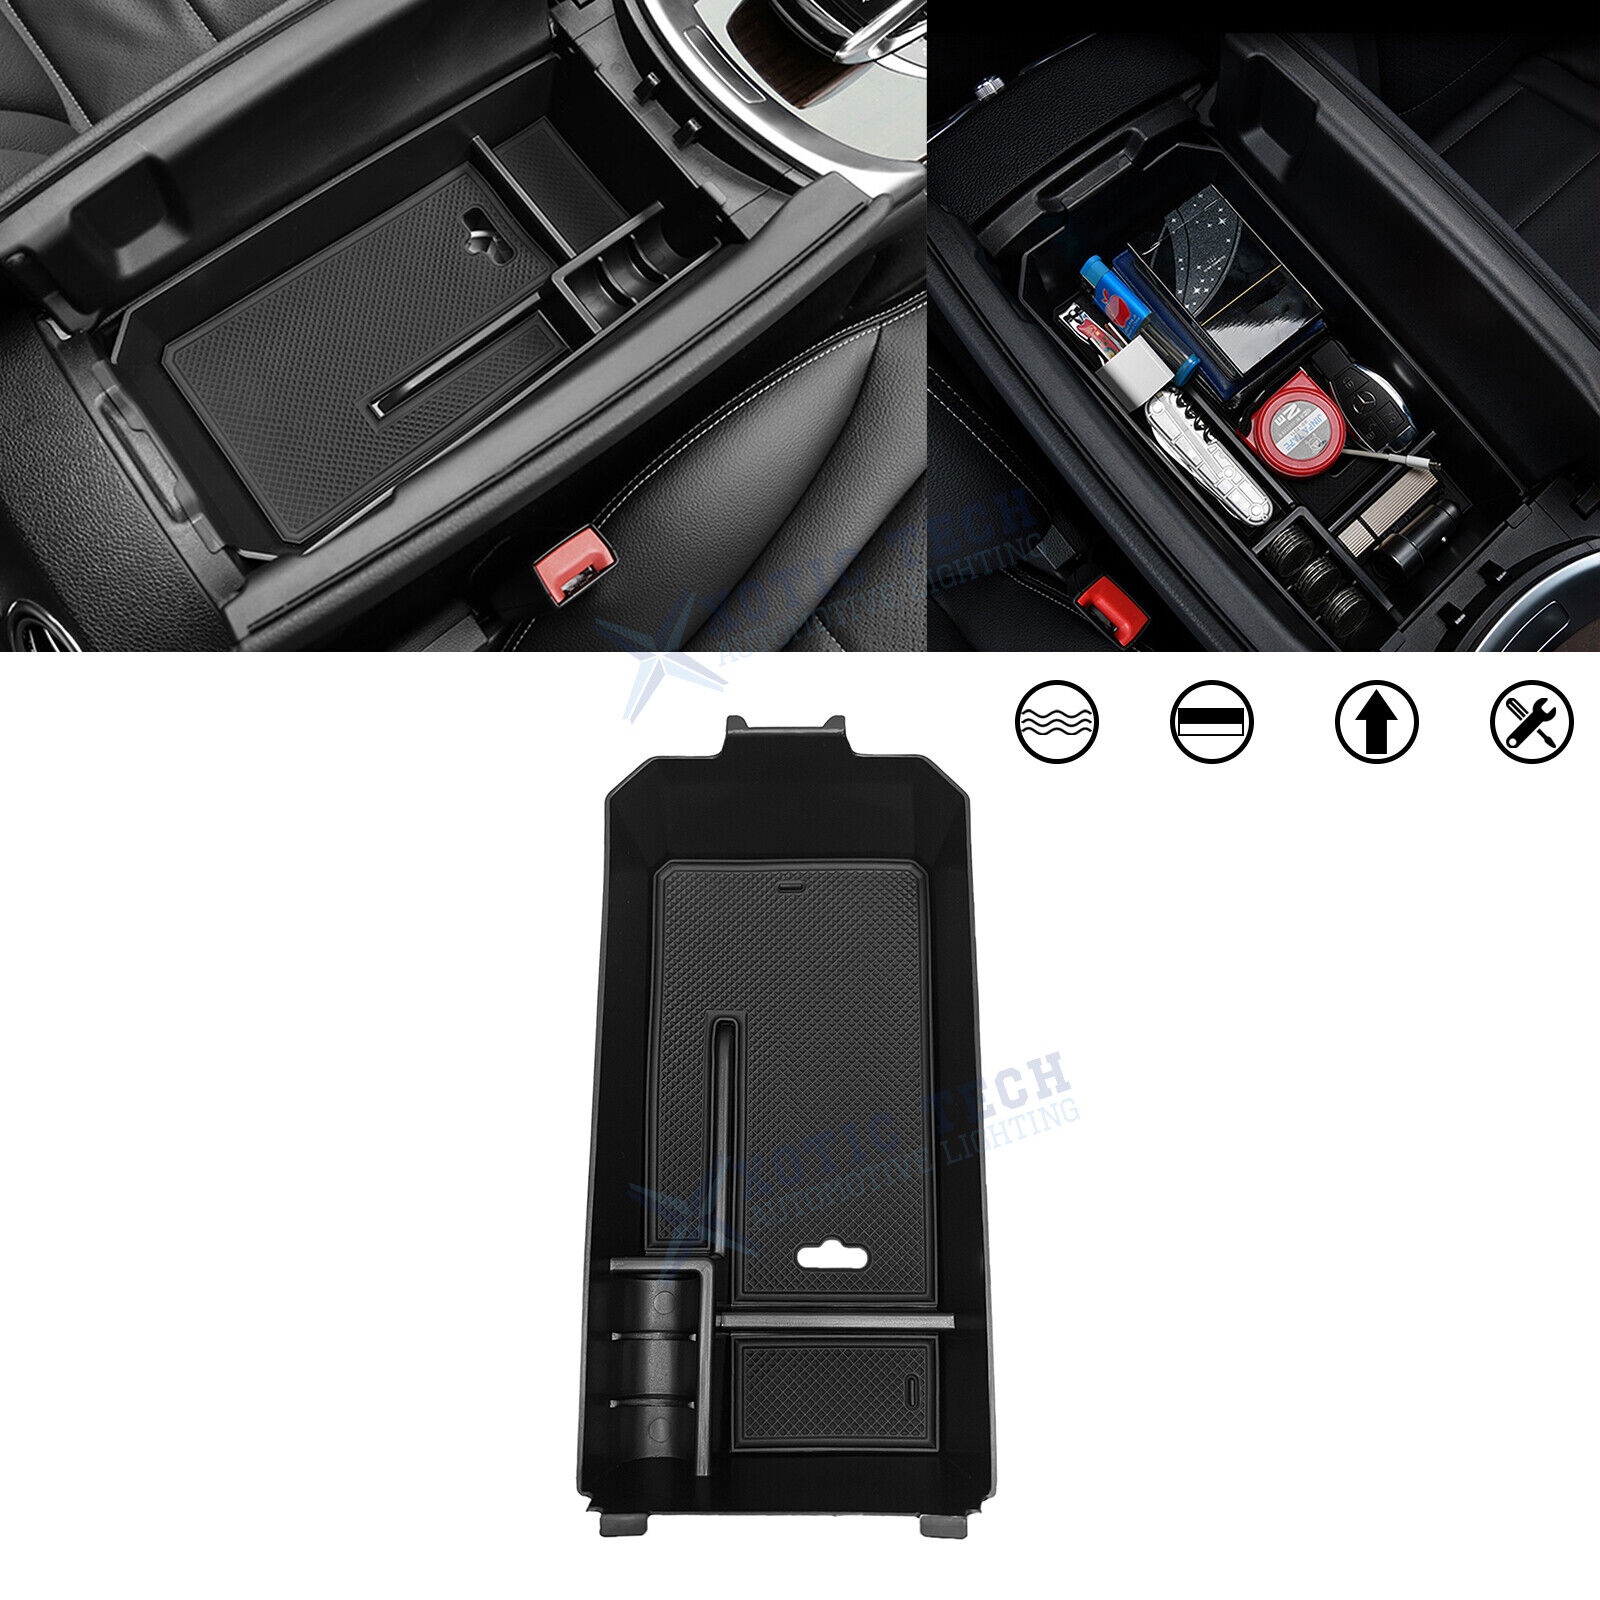 Console Container Tray Secondary Storage Box Insert For Mercedes C GLC Class 15+